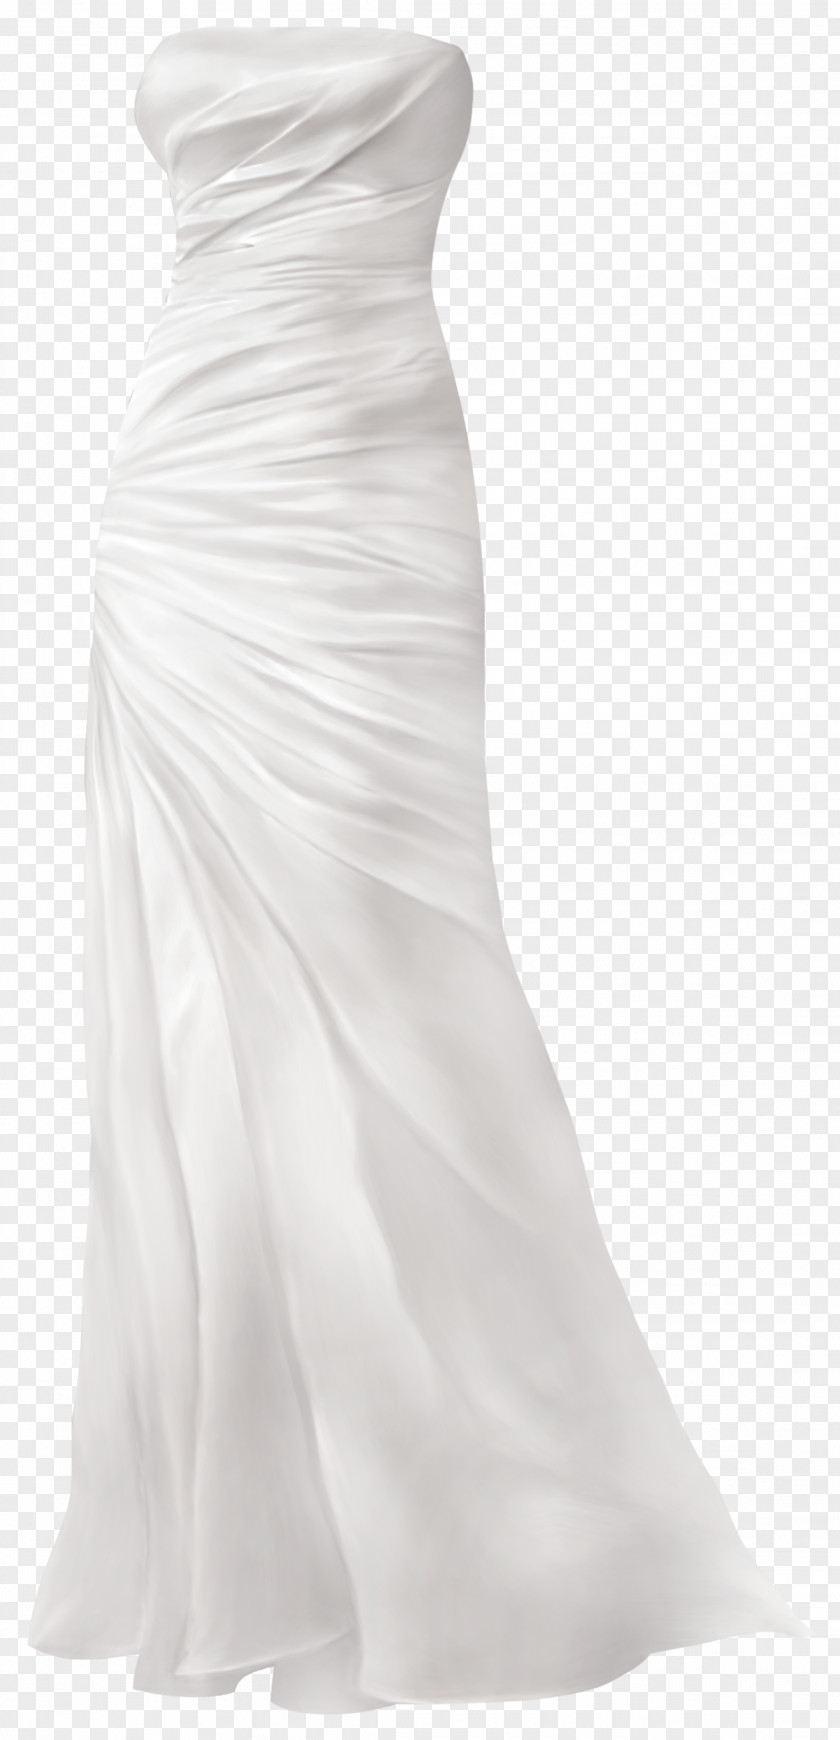 Dress Cocktail Wedding Gown PNG